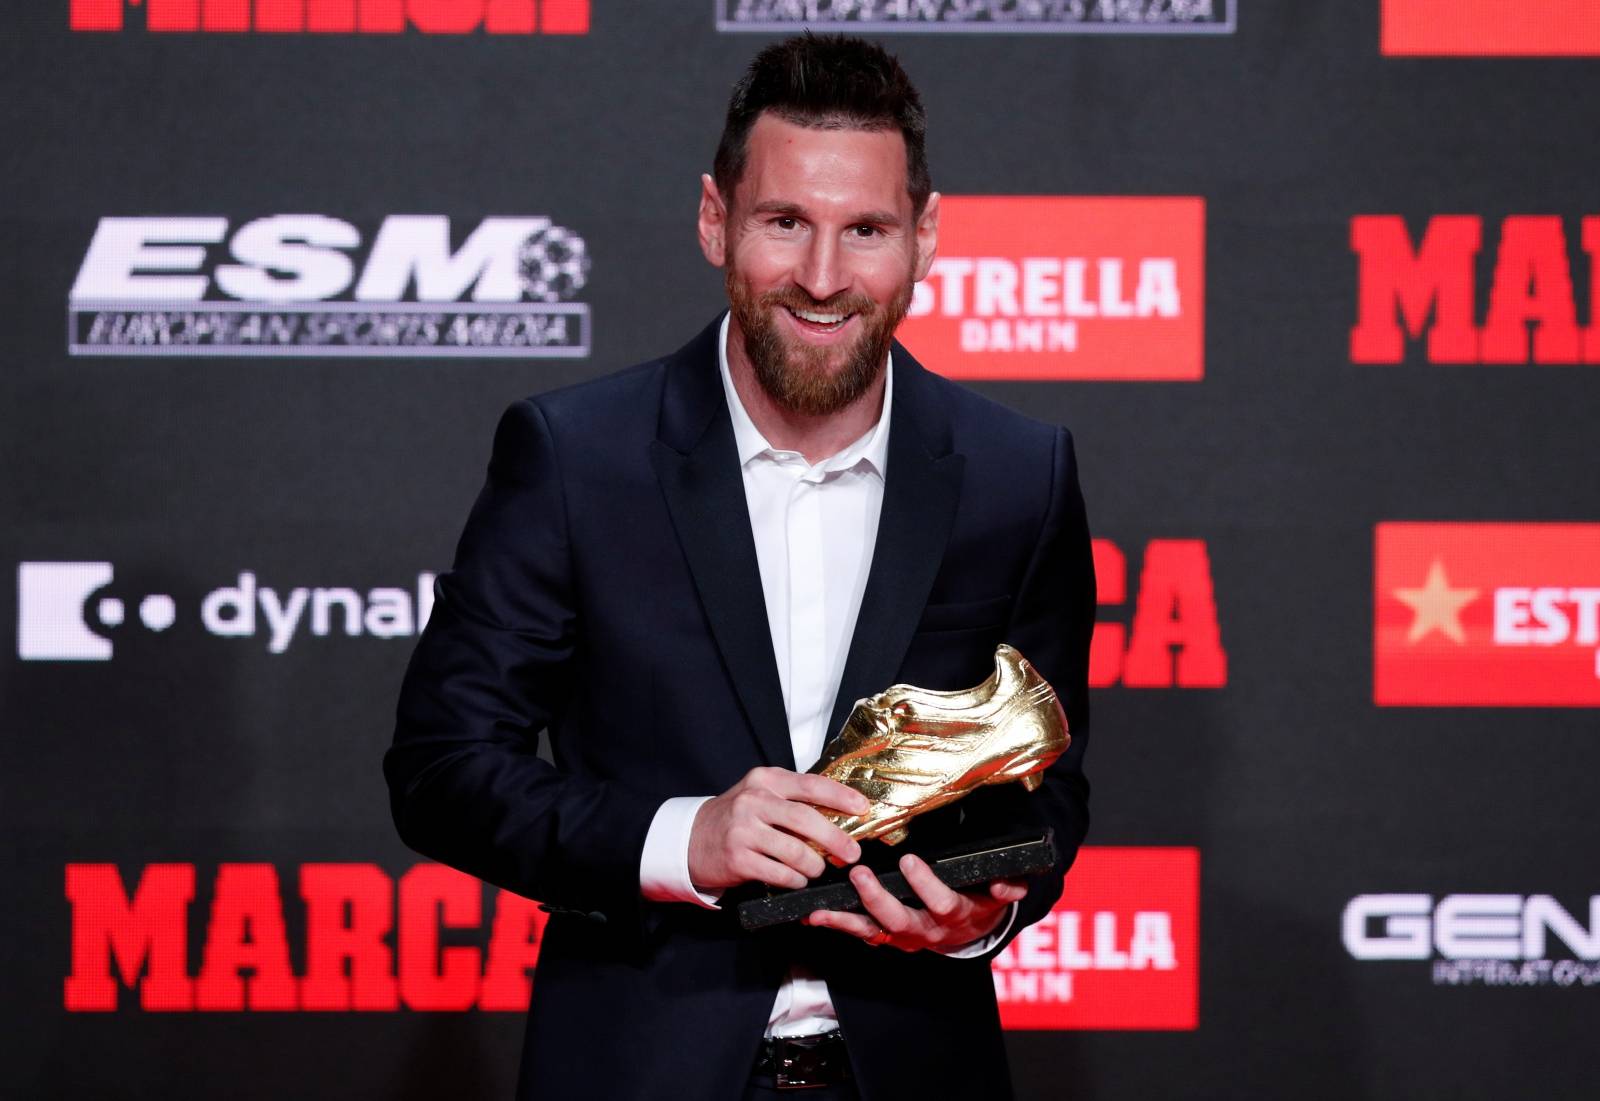 FC Barcelona's Lionel Messi receives his sixth Golden Shoe